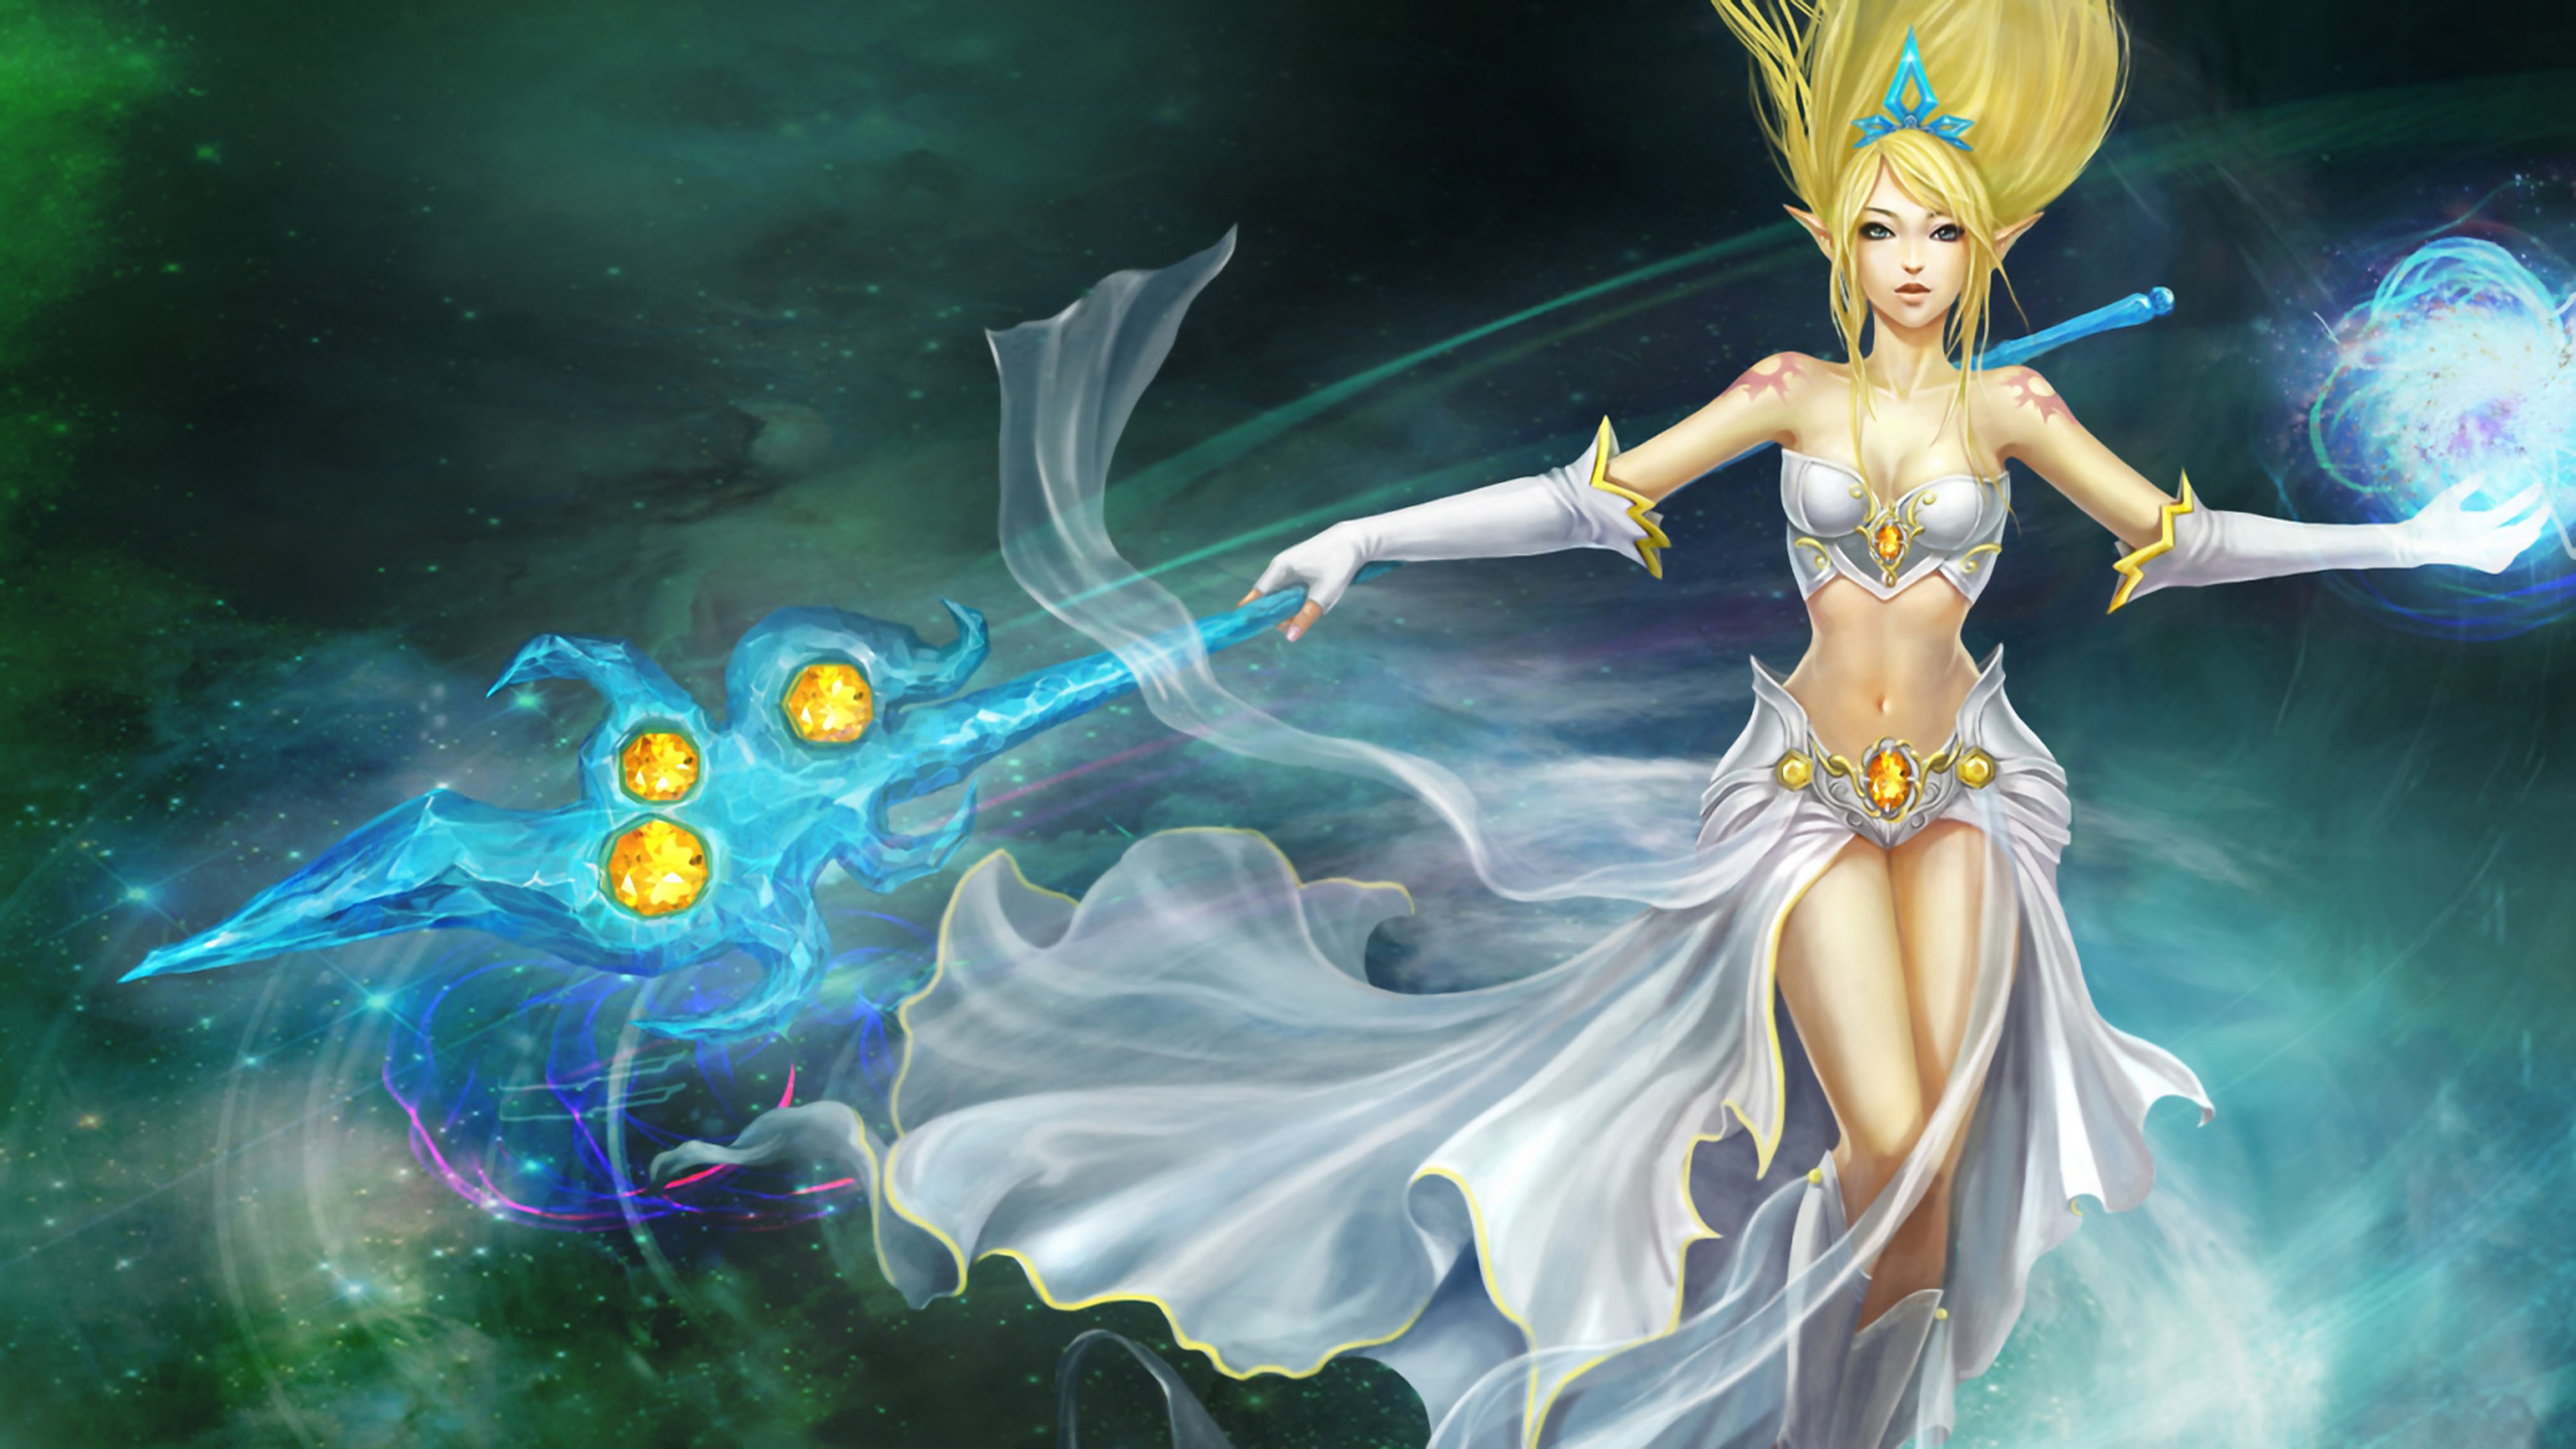 League of Legends, Janna the storms fury, Mage support, Monsoon howling gale, 3840x2160 4K Desktop